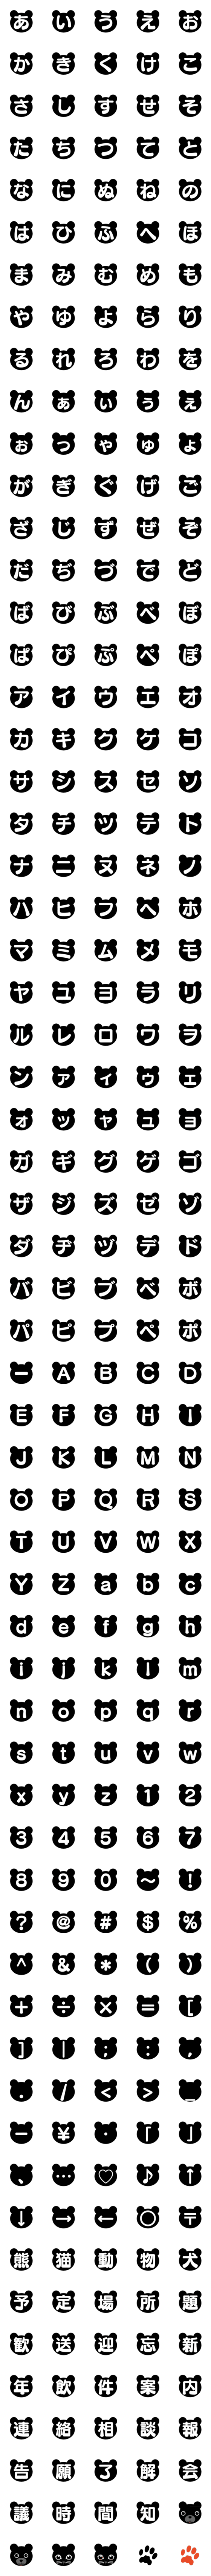 [LINE絵文字]クマ？ネコ？イヌ？文字 トーク見出し用01の画像一覧